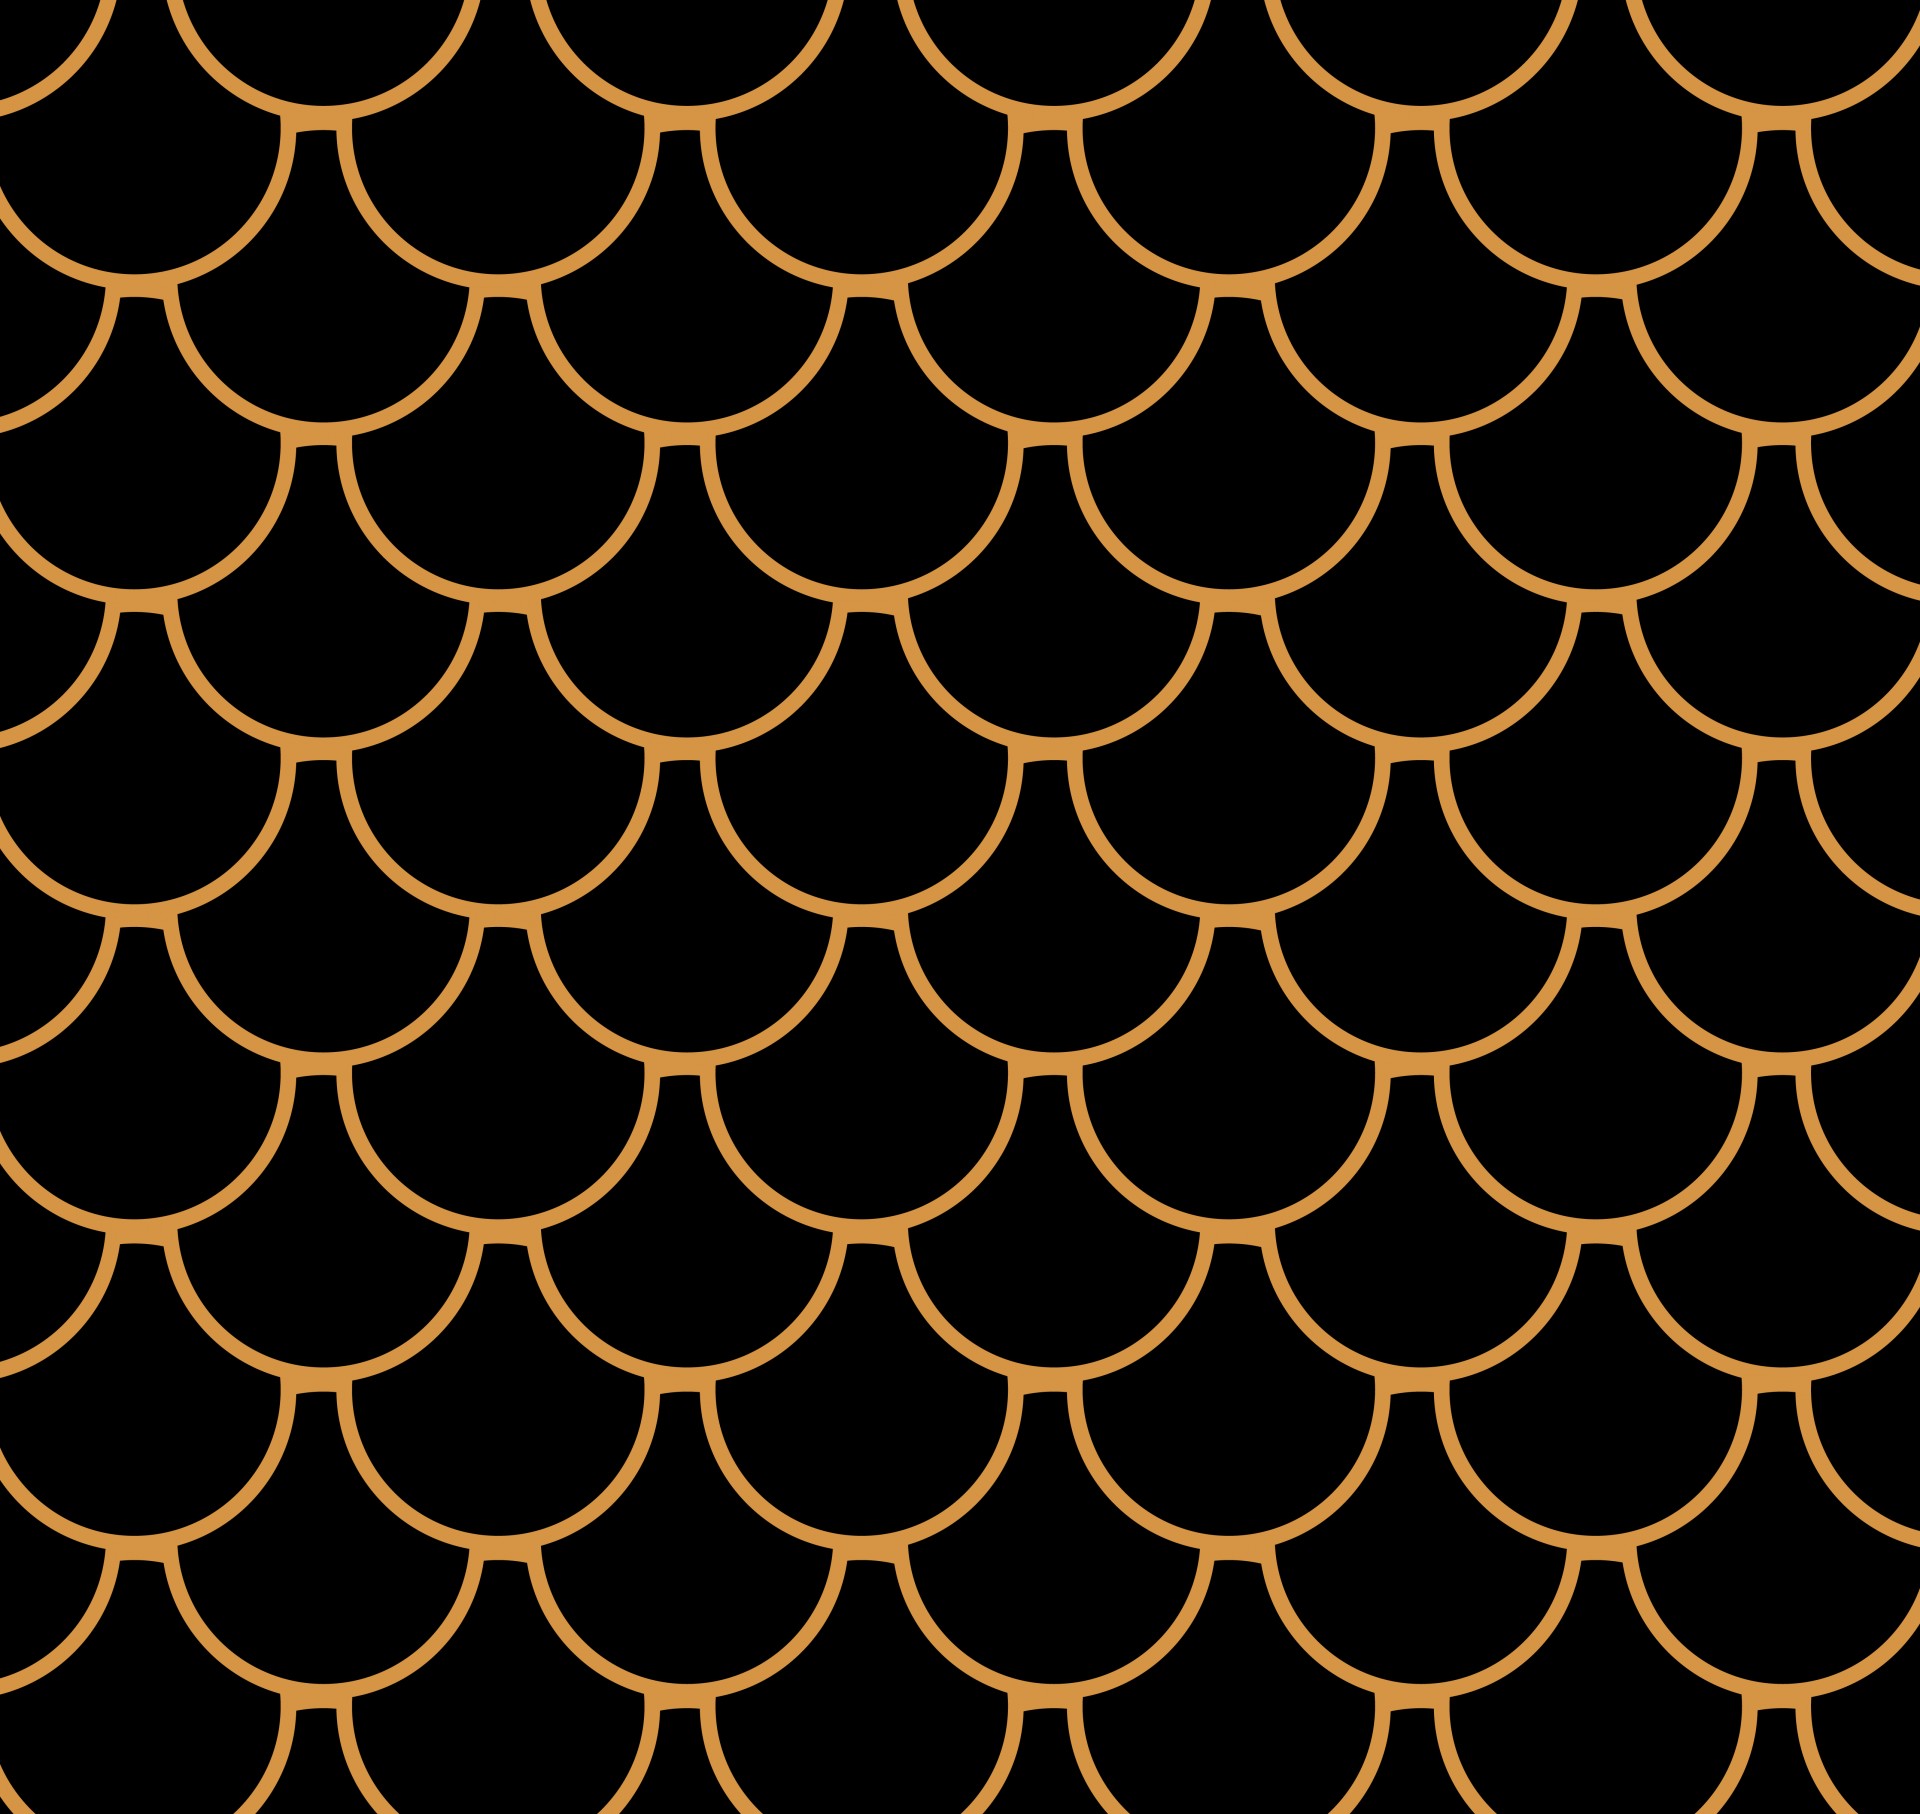 Fish scales, scales, art, wallpaper, pattern